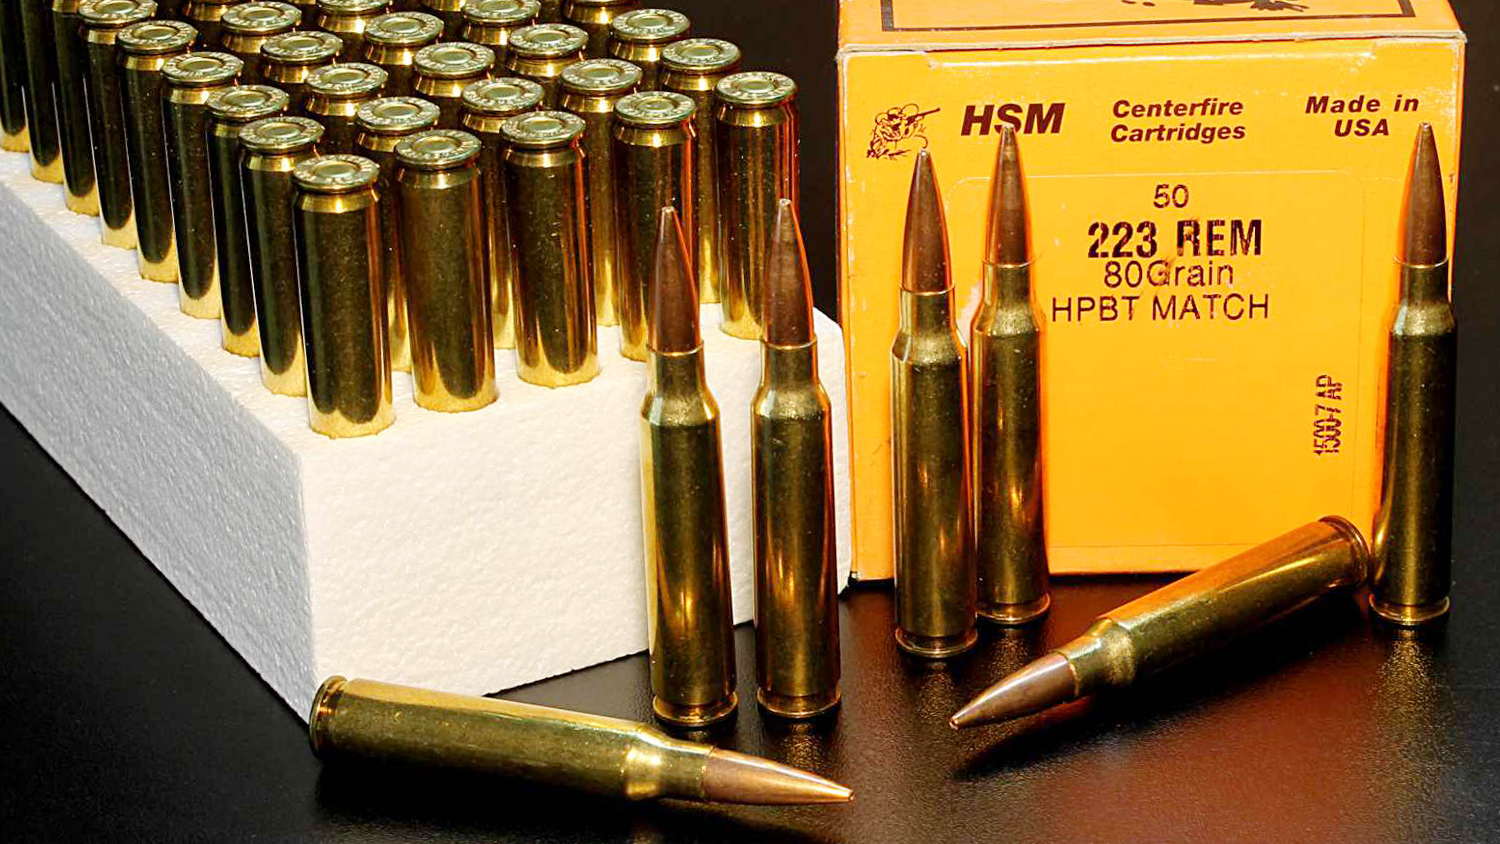 Service Rifle rounds